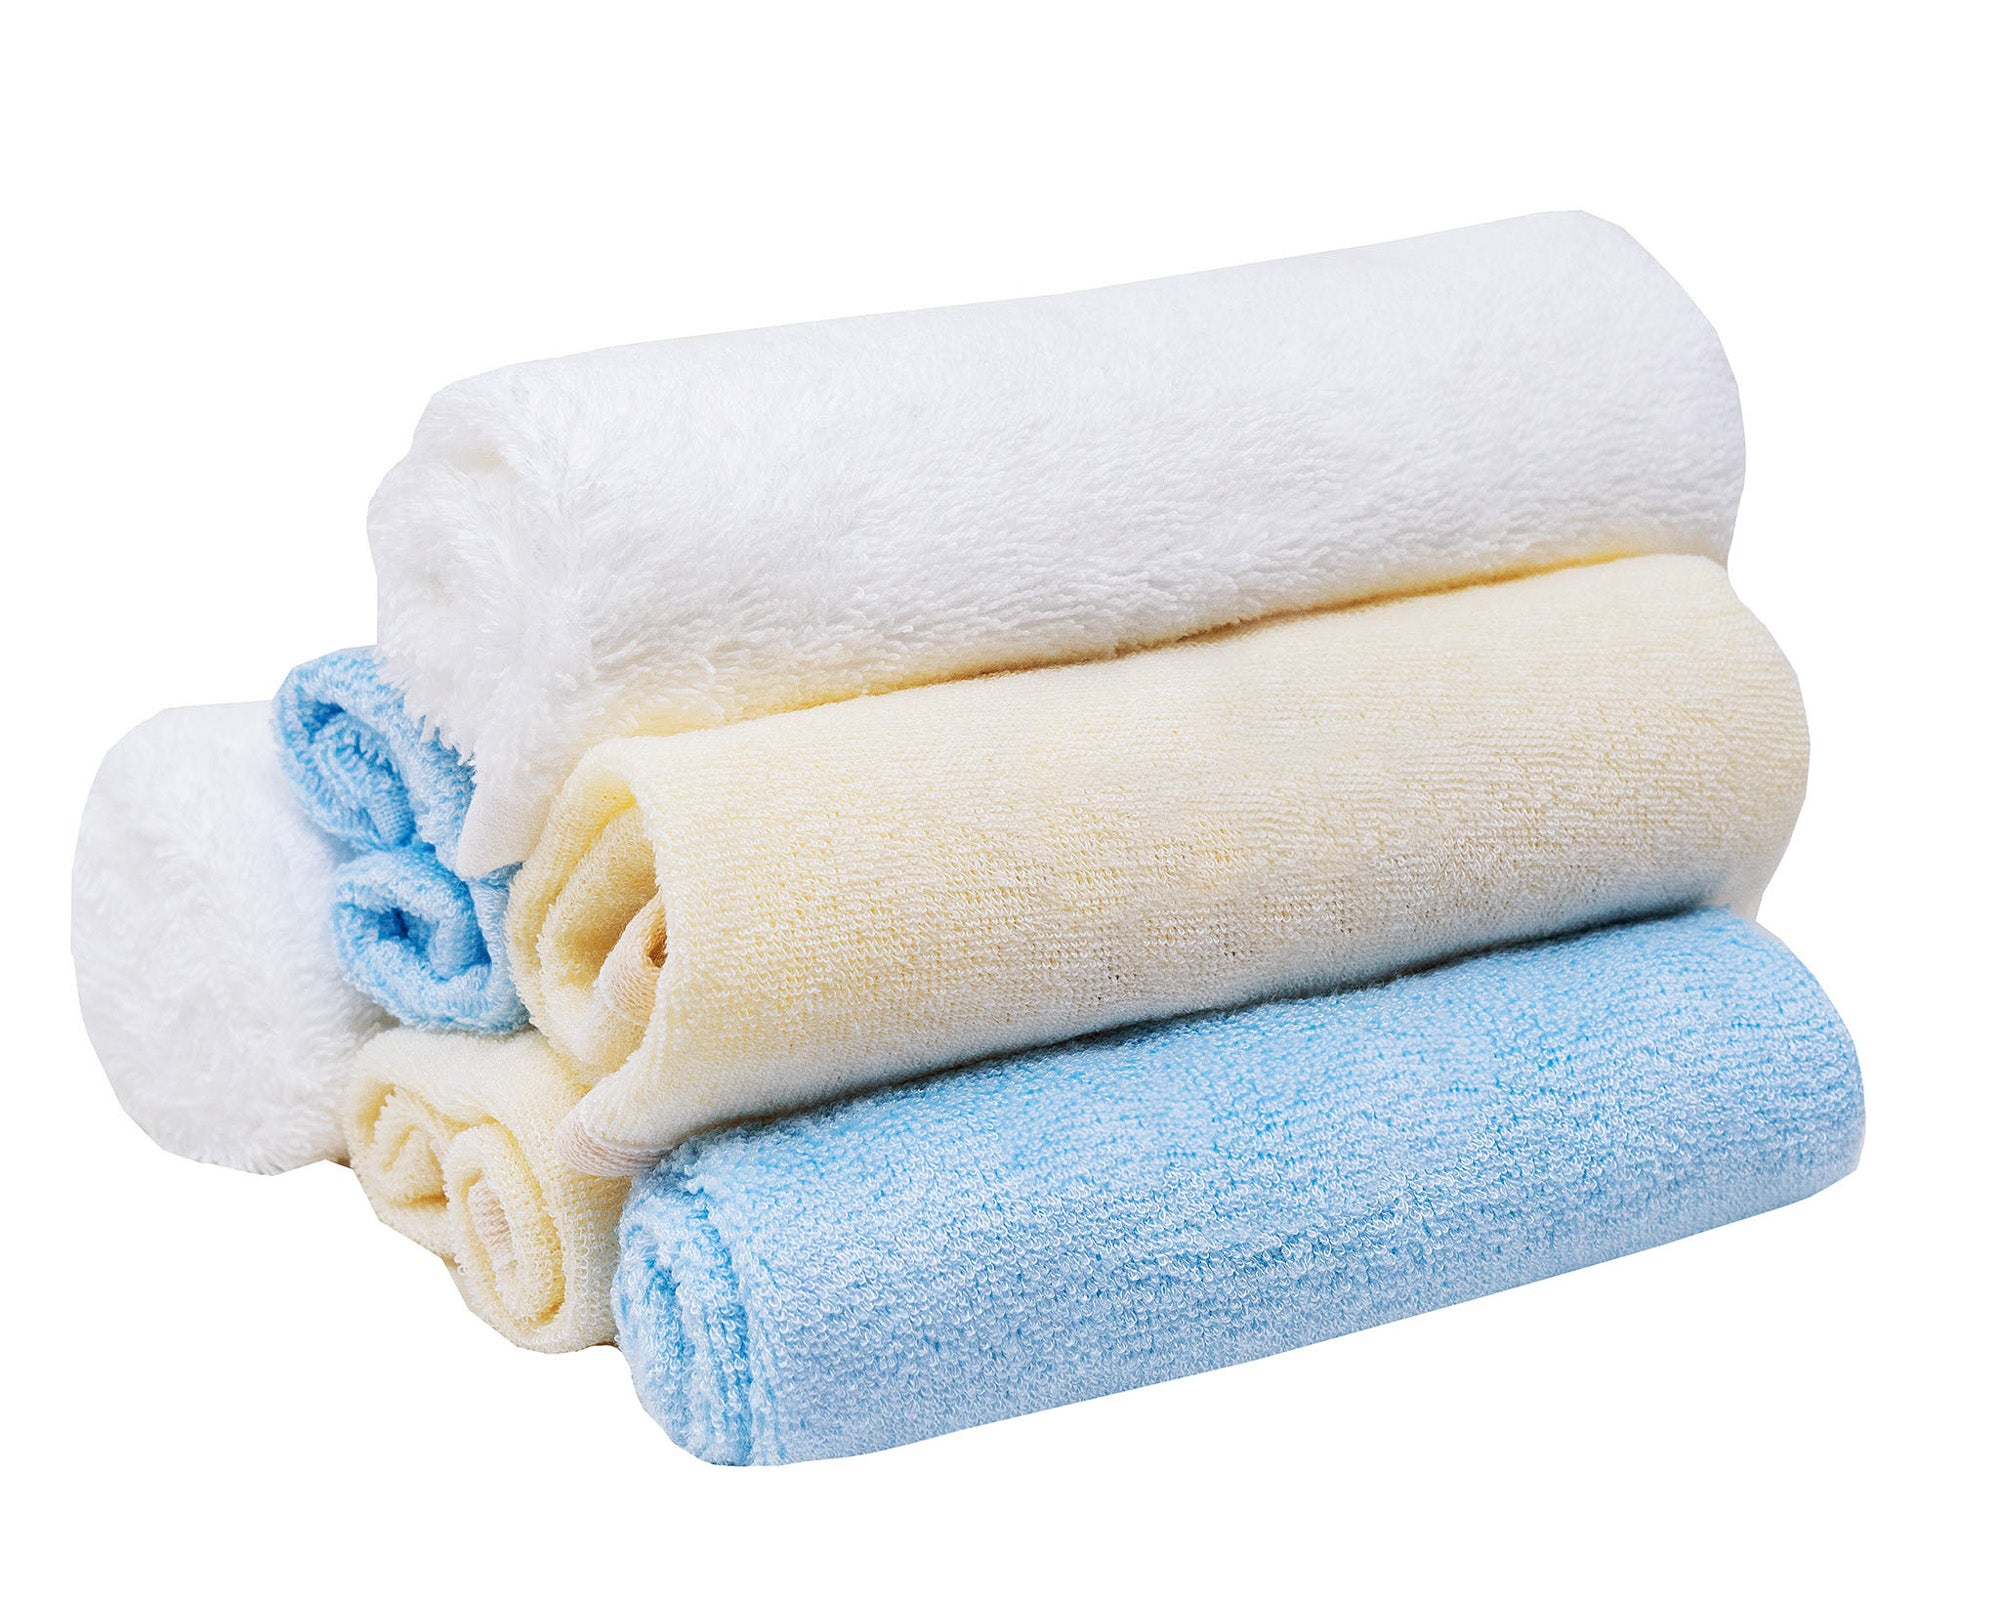 Crafty Cloth 6-Piece Towel Set for Face, Body, and Butt , Gentle Cleansing and Exfoliation (White,Beige,Blue)